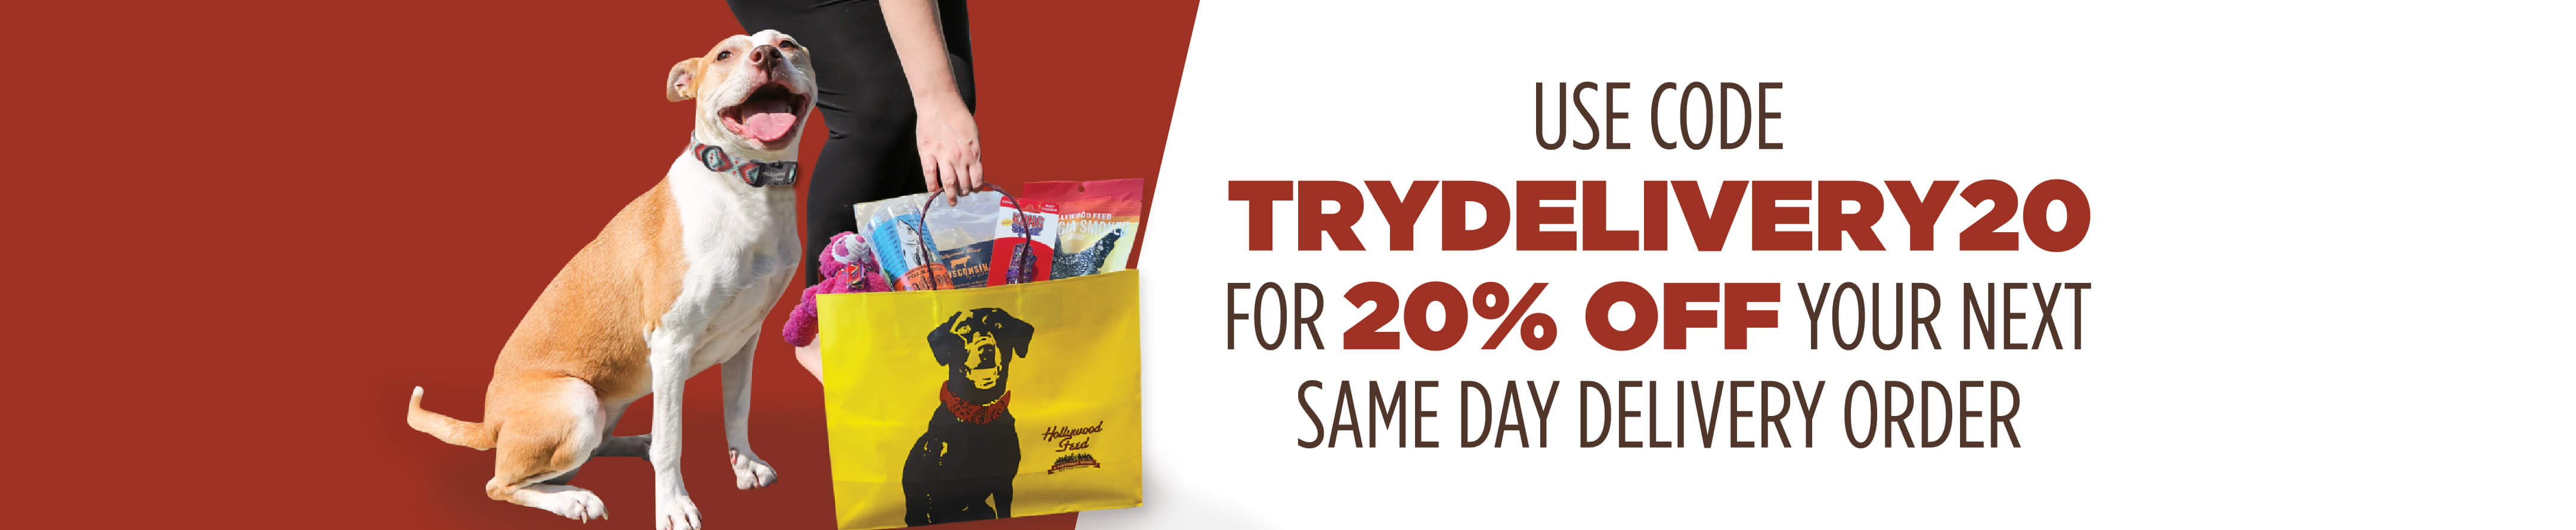 Use Code TRYDELIVERY20 for 20% Off your next Same Day Delivery Order!